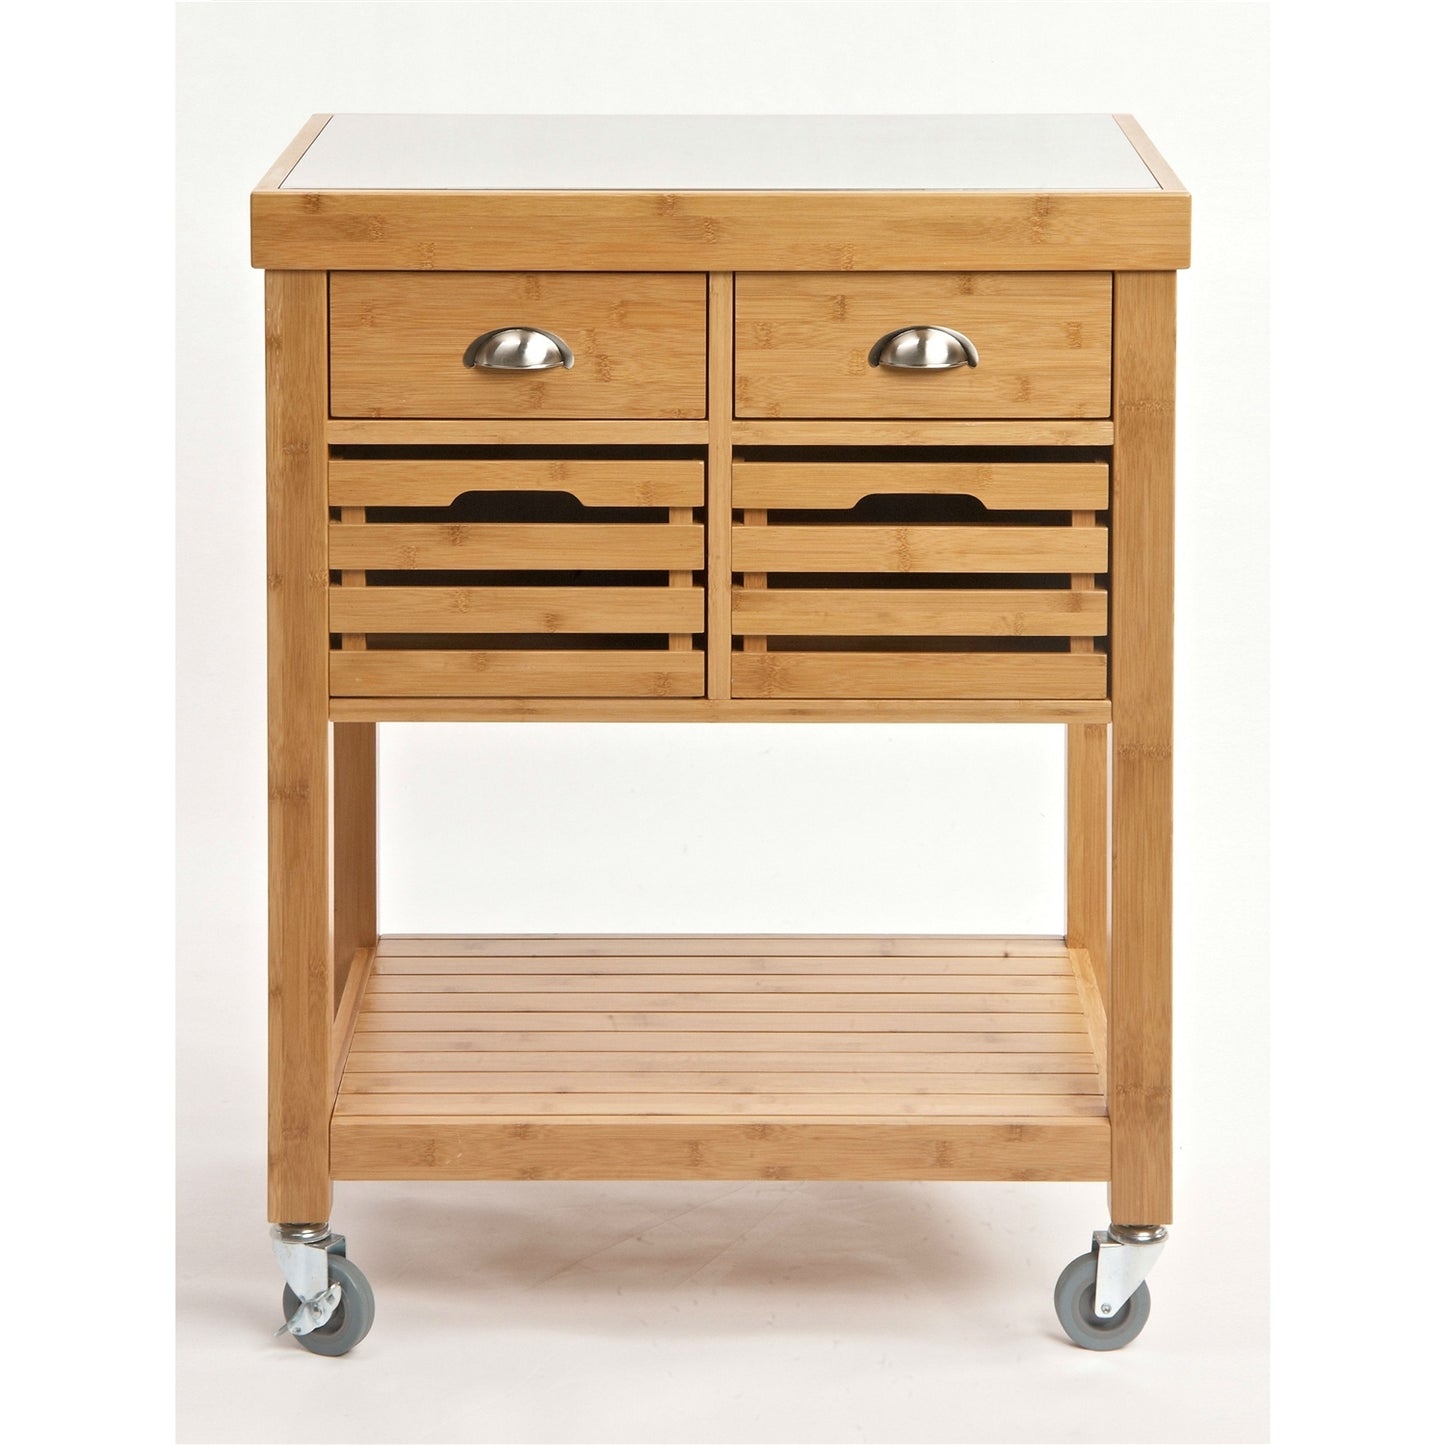 Stainless Steel Top Bamboo Wood Kitchen Cart with Casters